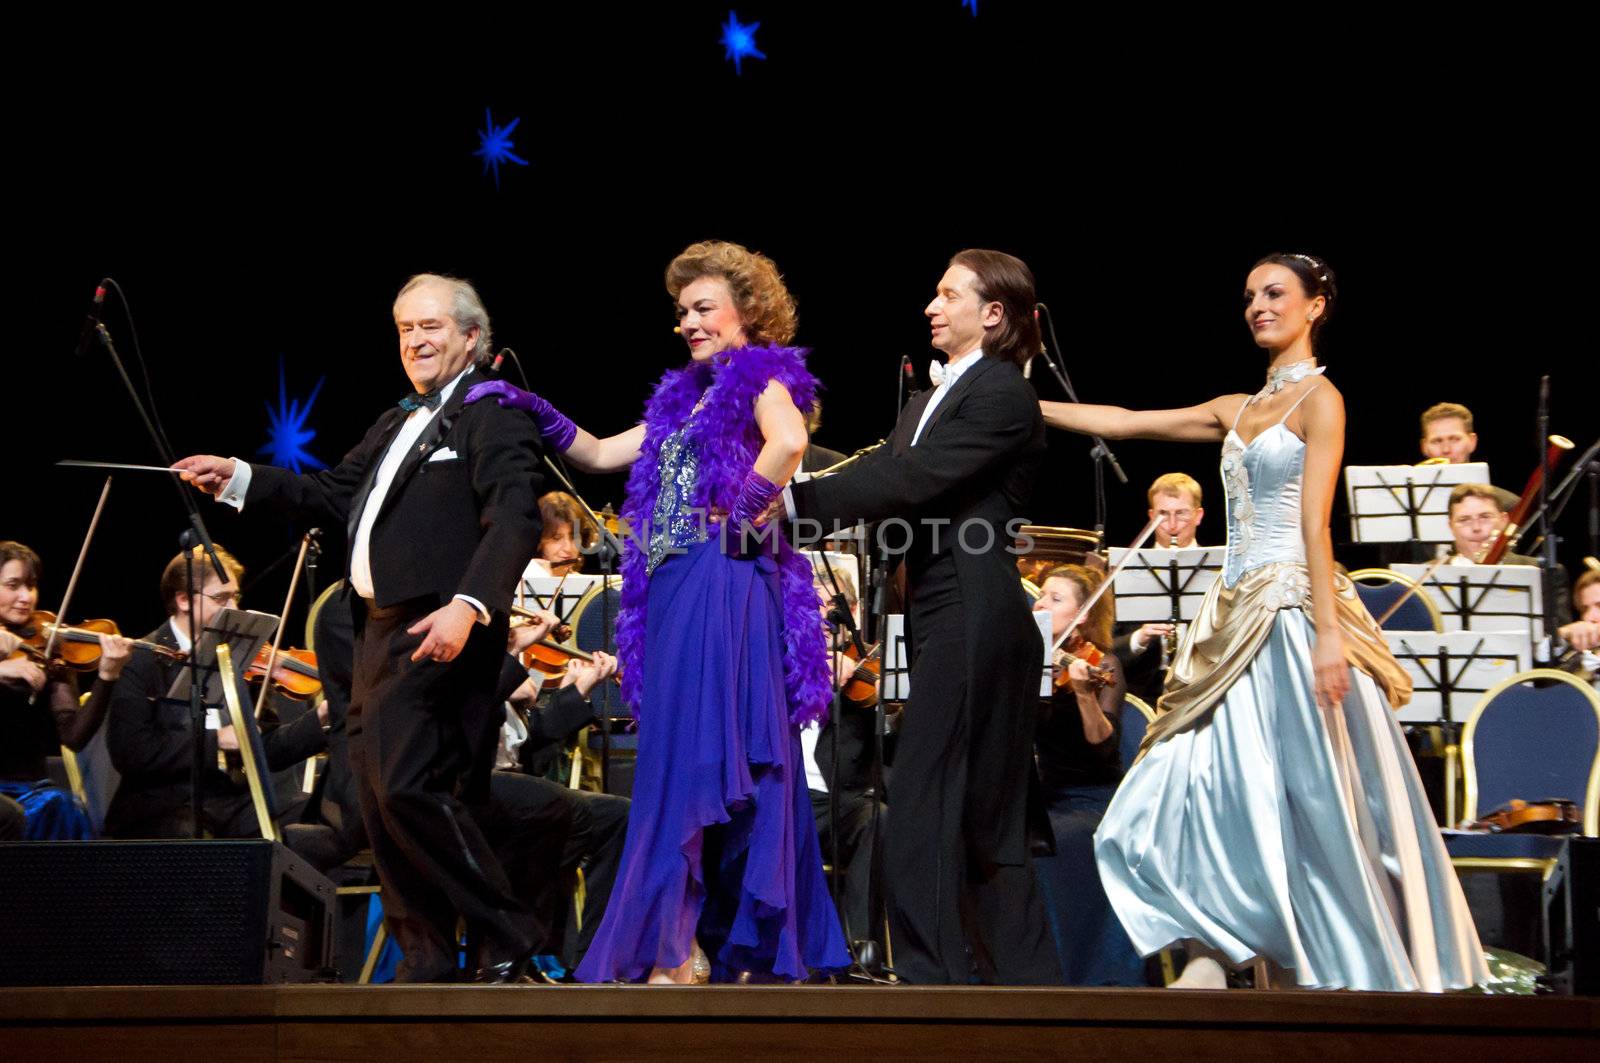 Conductor Peter Guth, singer Monica Mosser, dancers  and Strauss Festival Orchestra Vienna in concert Crocus City Hall. 
Moscow - November 17, 2010